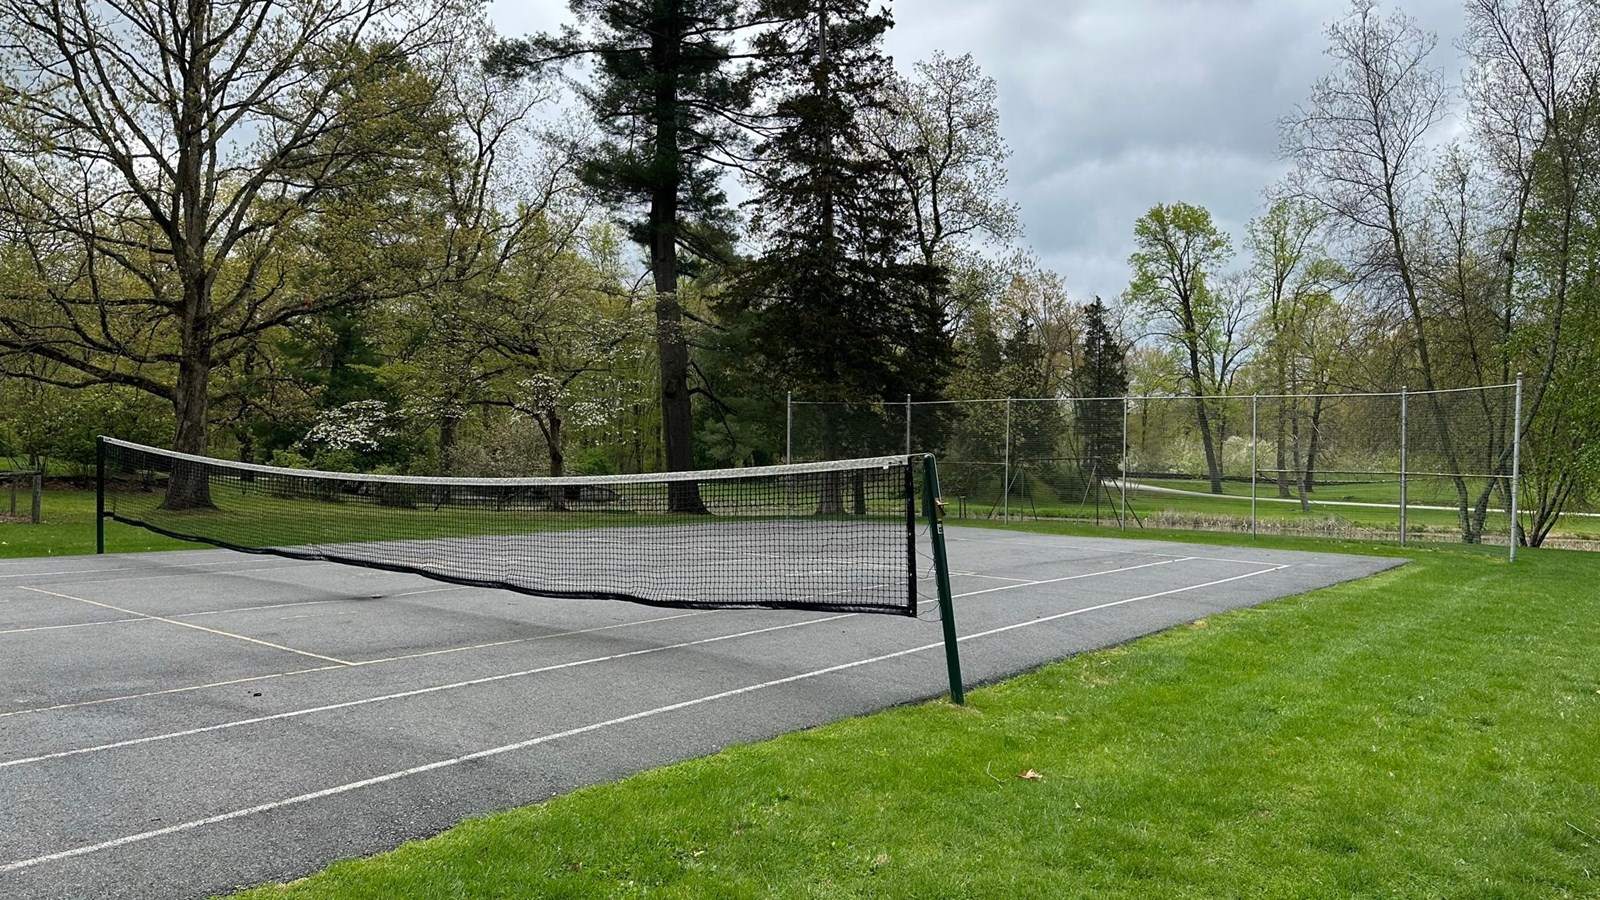 An asphalt tennis court with wire back drops on each end.